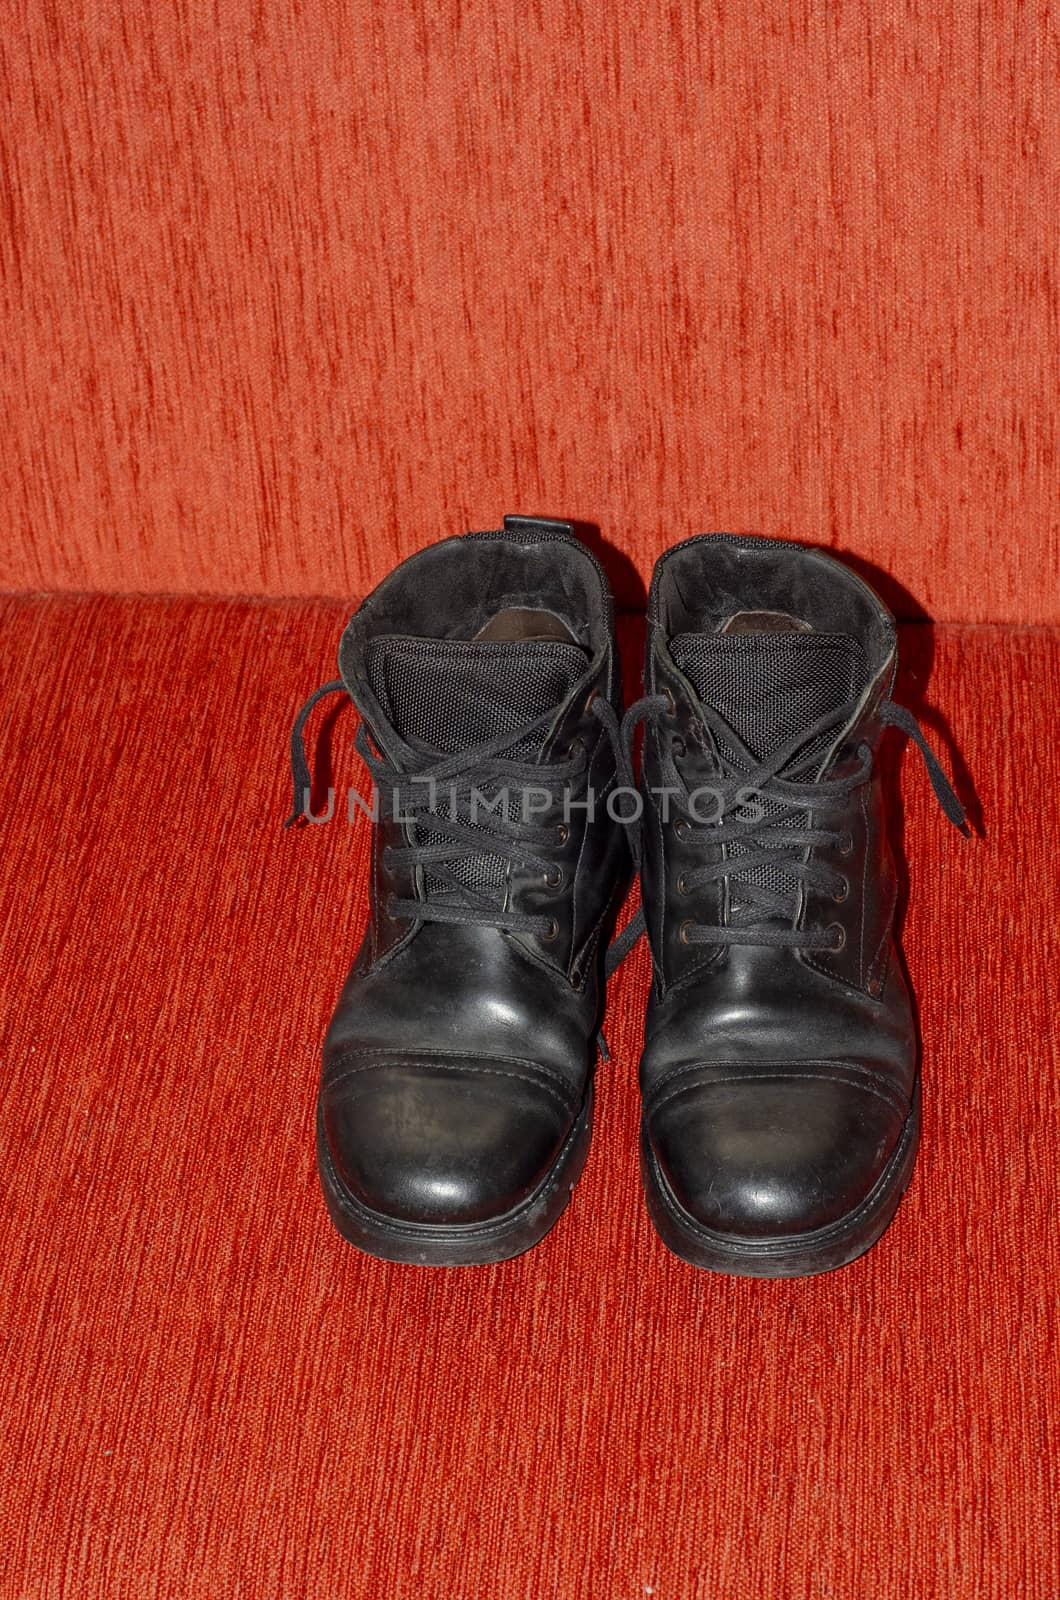 Old Black Leather Boots, Vintage by Hasilyus